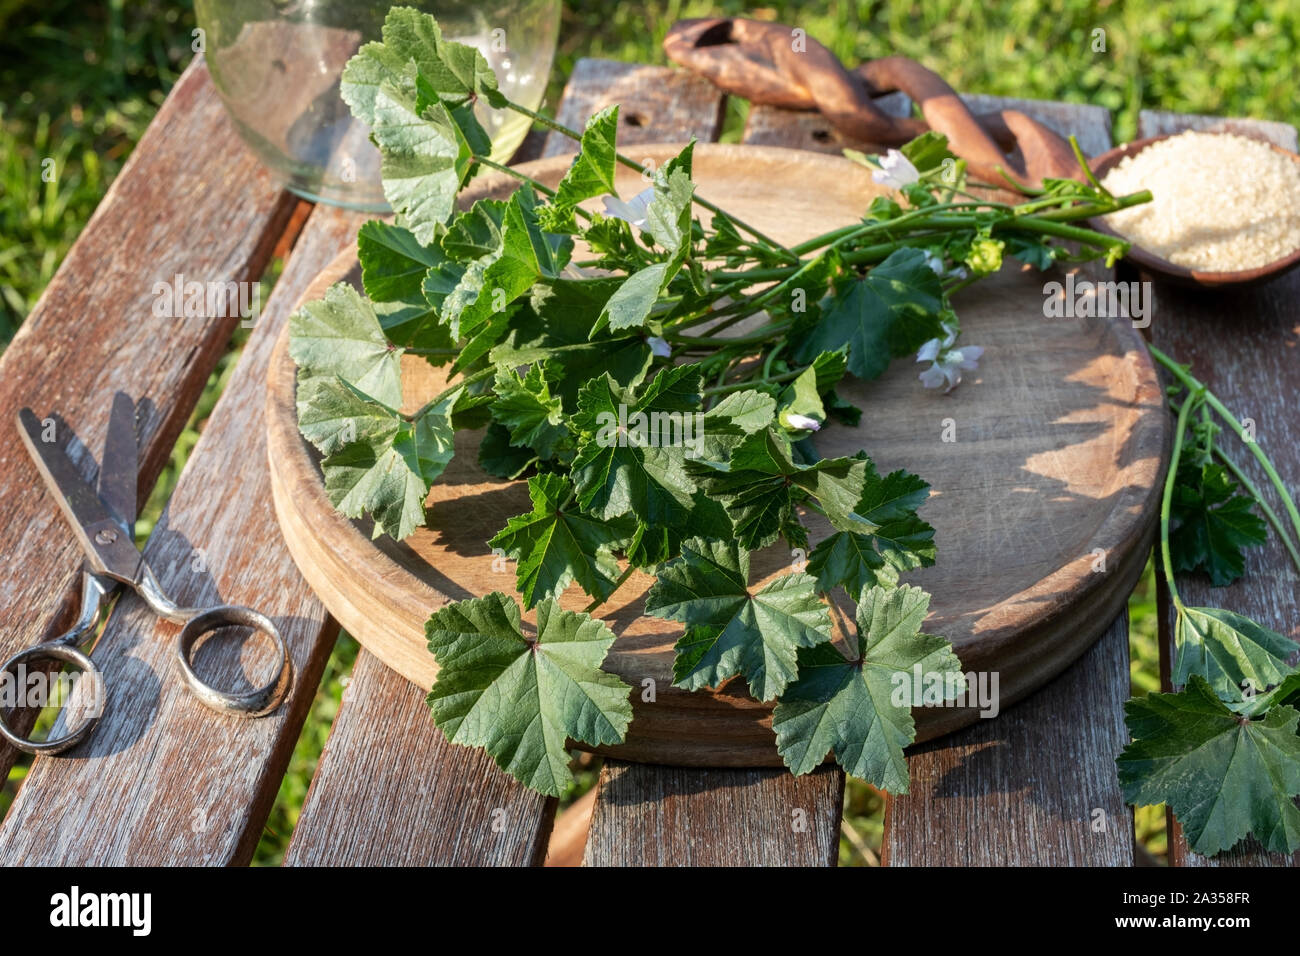 Preparation of mallow syrup from fresh Malva neglecta plant and cane sugar, outdoors Stock Photo